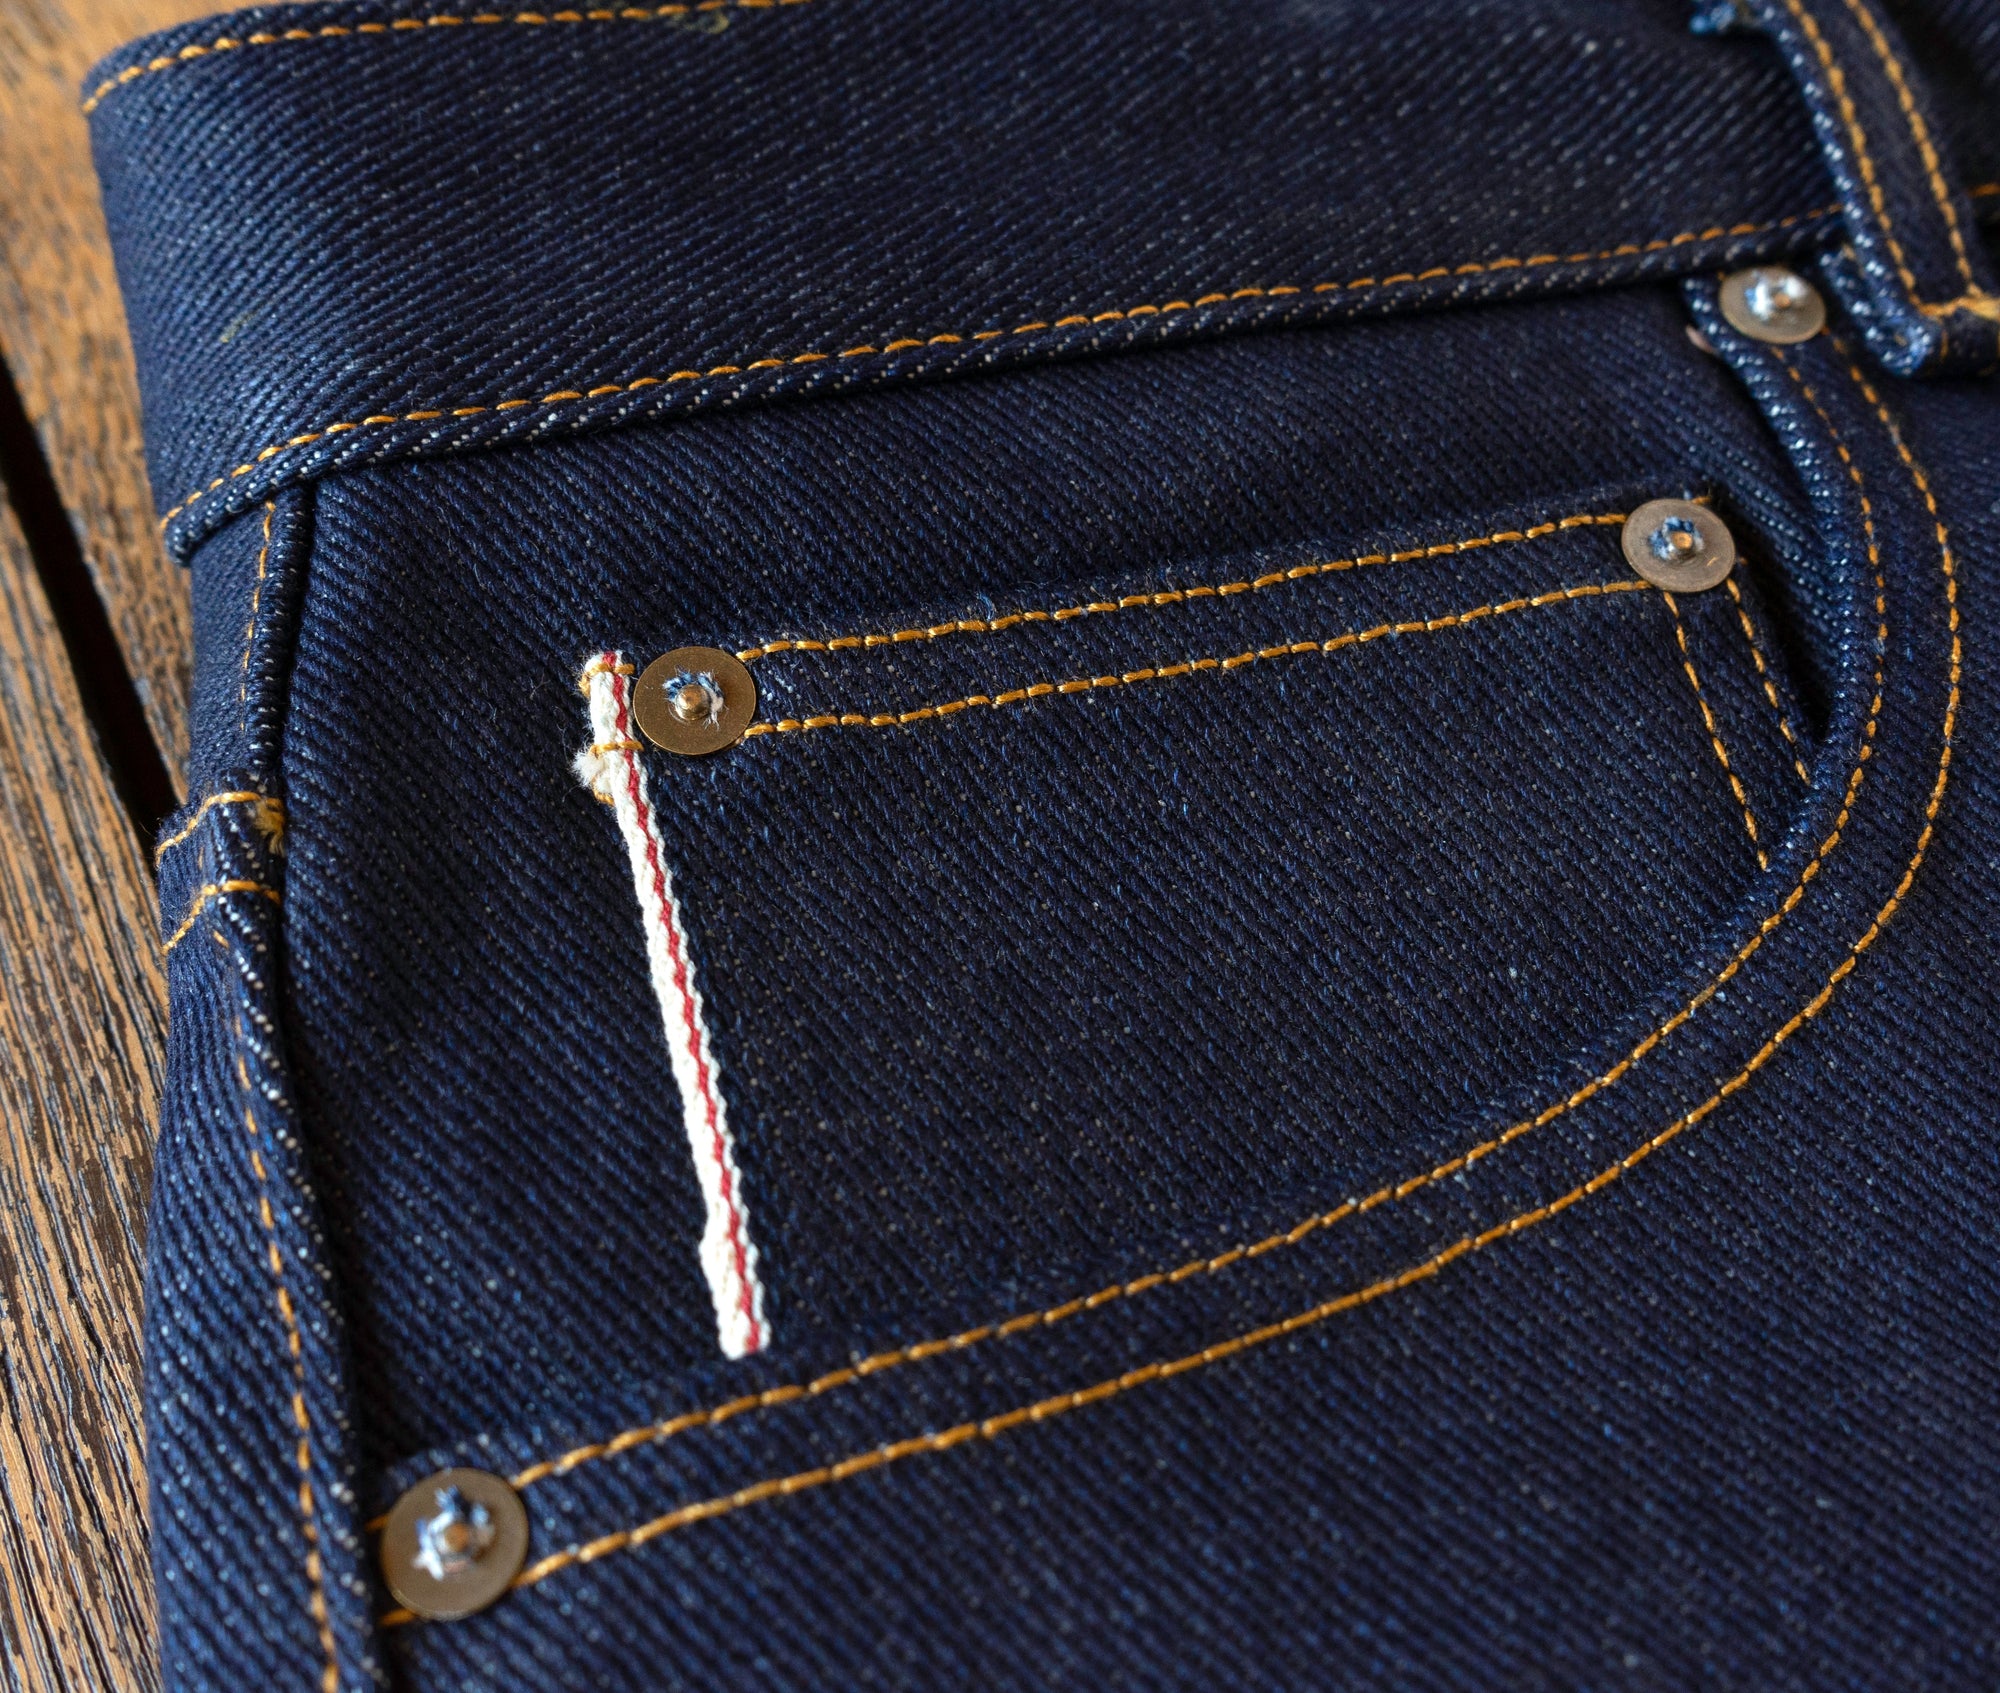 A More Focused Update of the 21.5 oz BRAVESTAR Selvedge